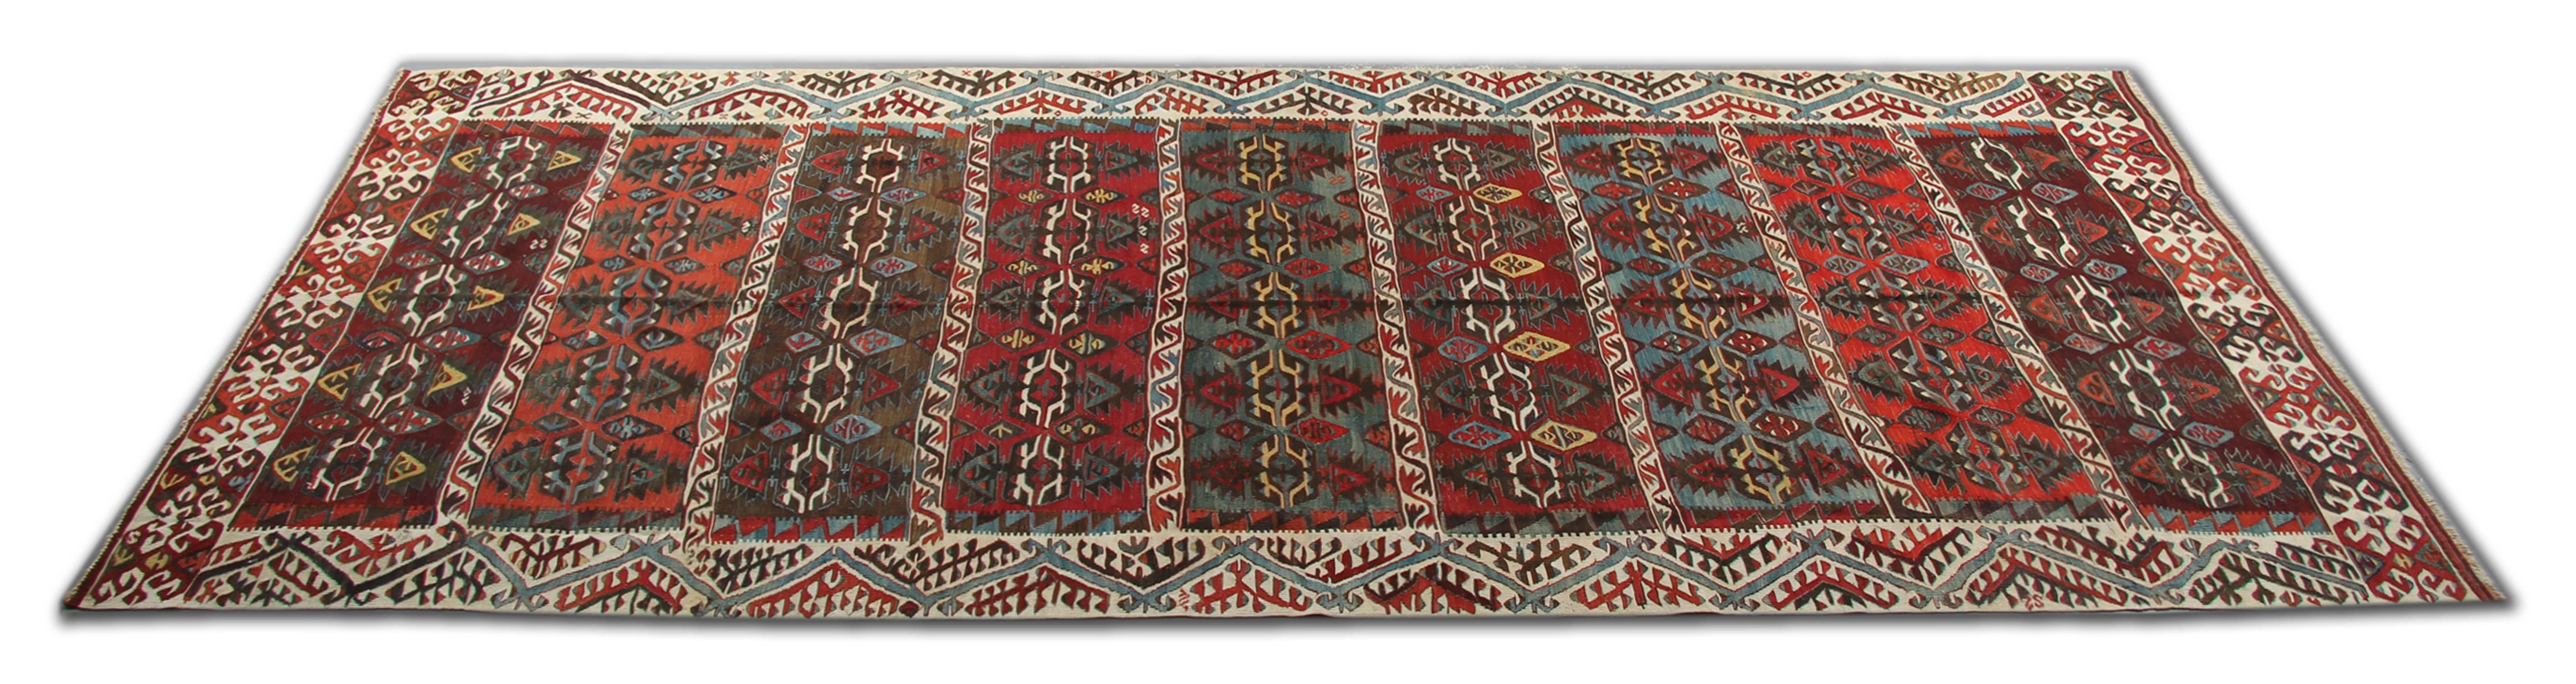 This handmade carpet Turkish rug is antique rug traditional handwoven runner rugs come from Turkey. This kind of carpet runners is suitable for stair runners and hallway rugs, in a striking color combination of bright red, shiny yellow, navy, light